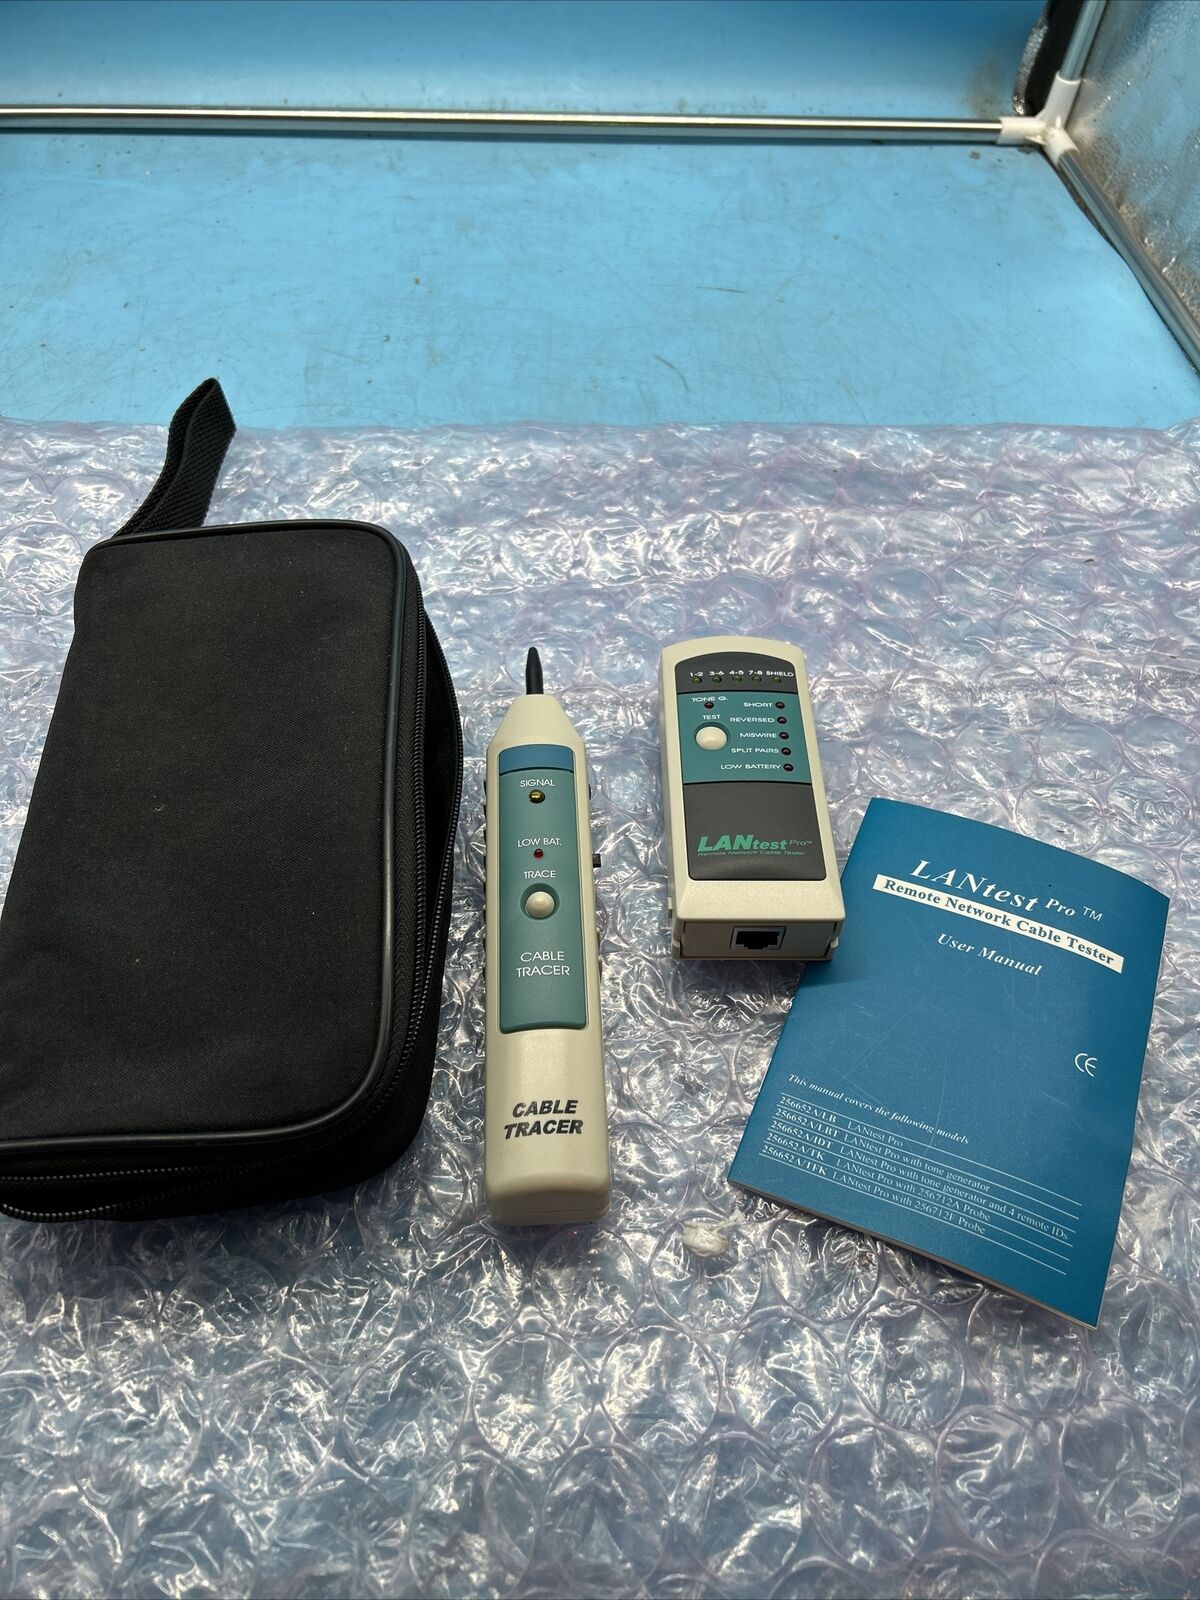 LANtest Pro Remote Network Cable Tester With Case